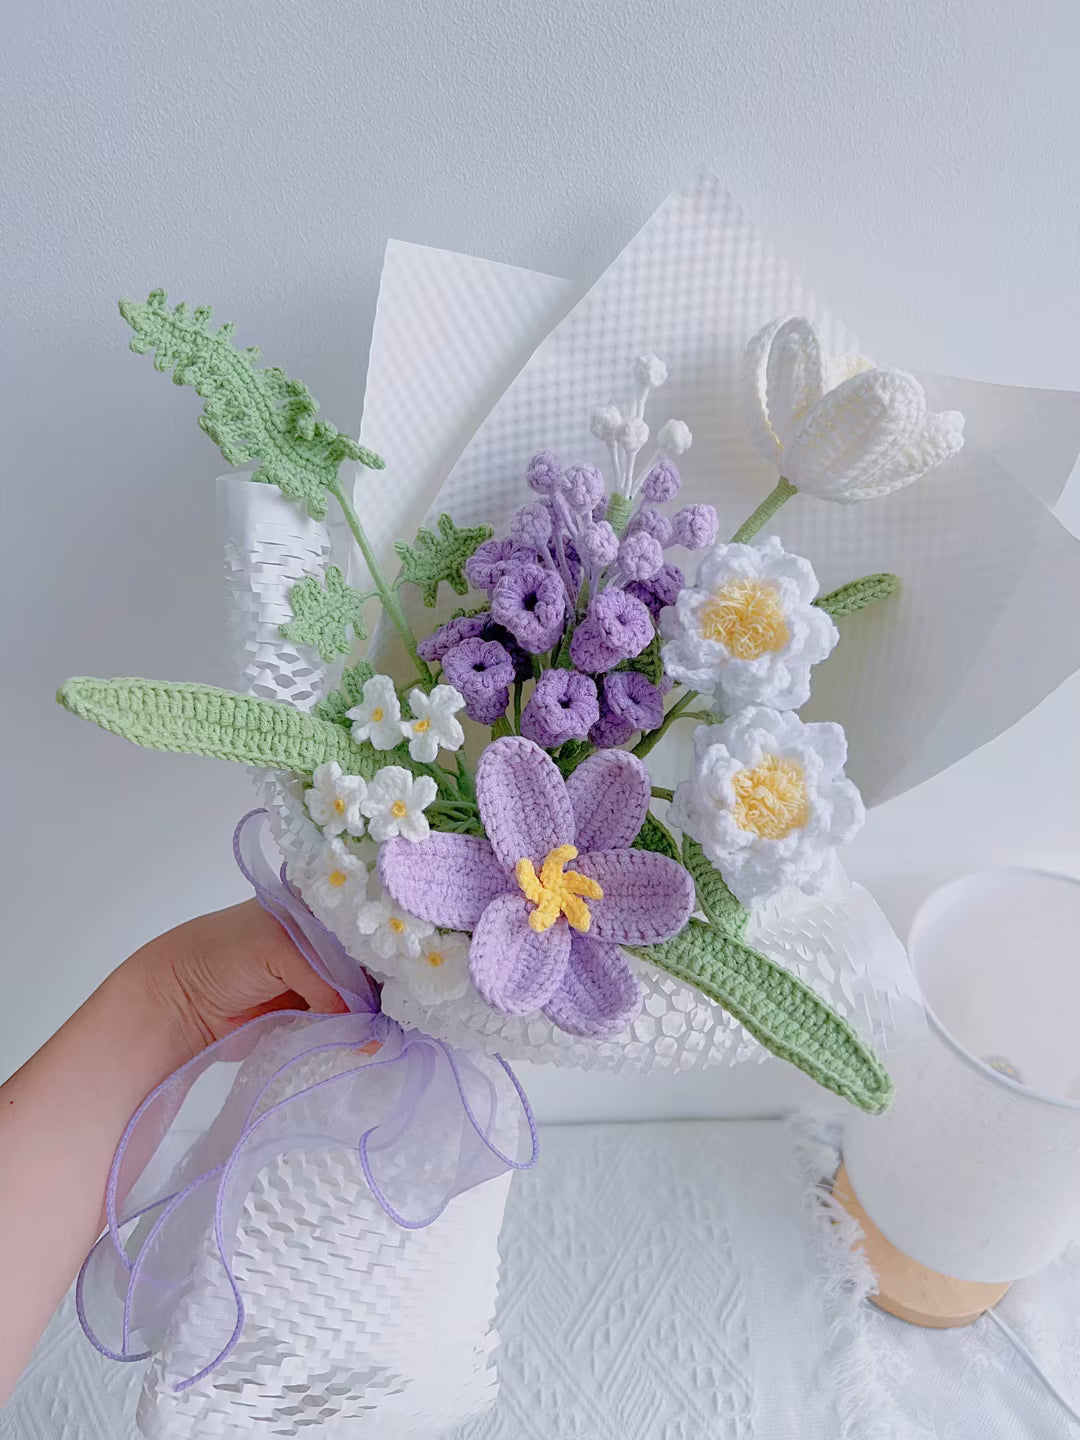 Crochet bouquet,Handmade flowers bouquet,crochet flower bouquet,valentine’s day and mother day, The bride carried flowers